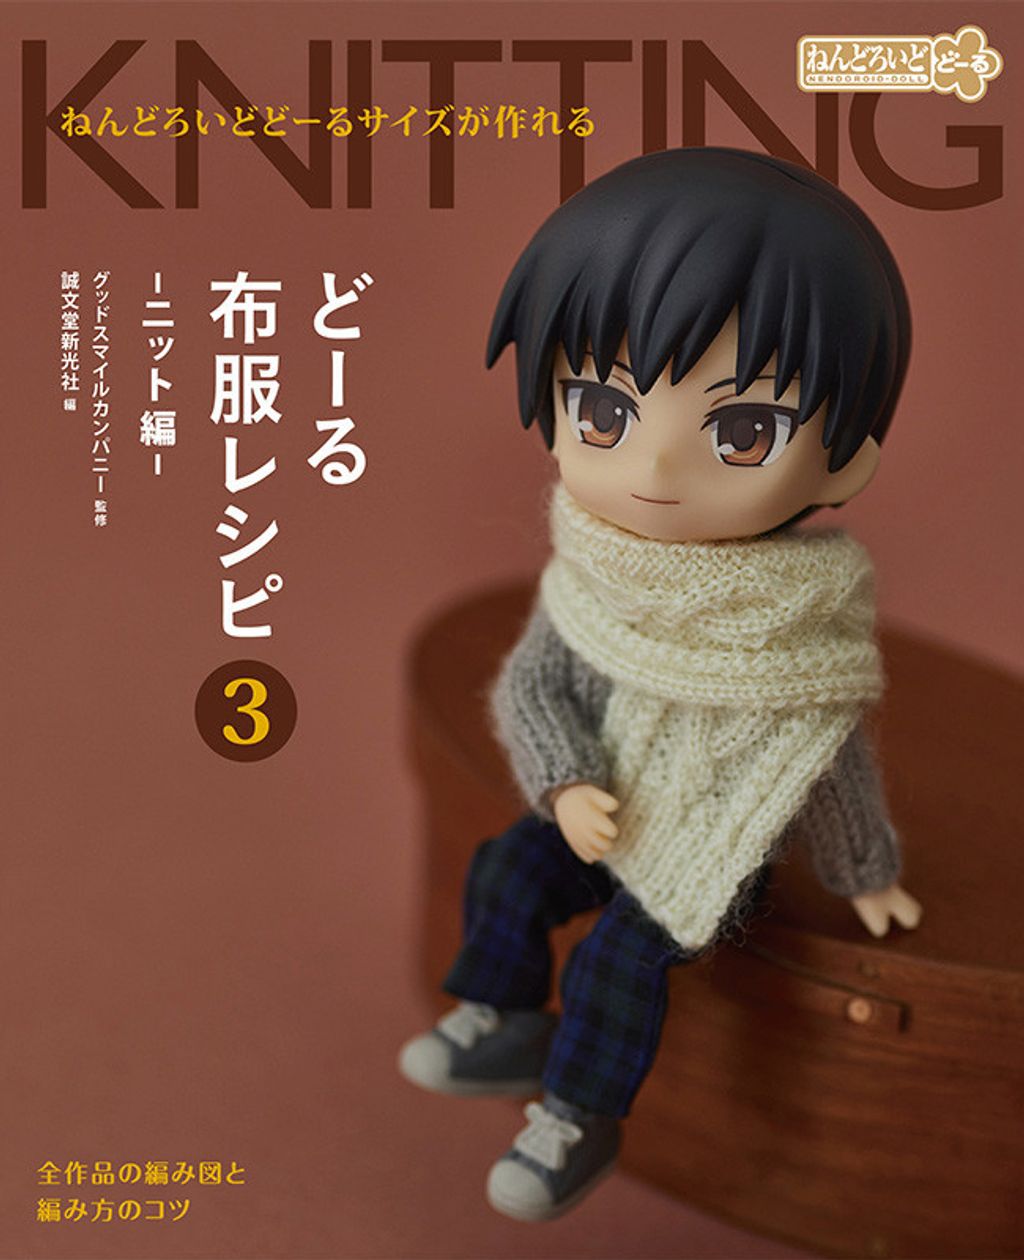 Creating in Nendoroid Doll Size - Clothing Patterns 3 (Knitted Clothes).jpg